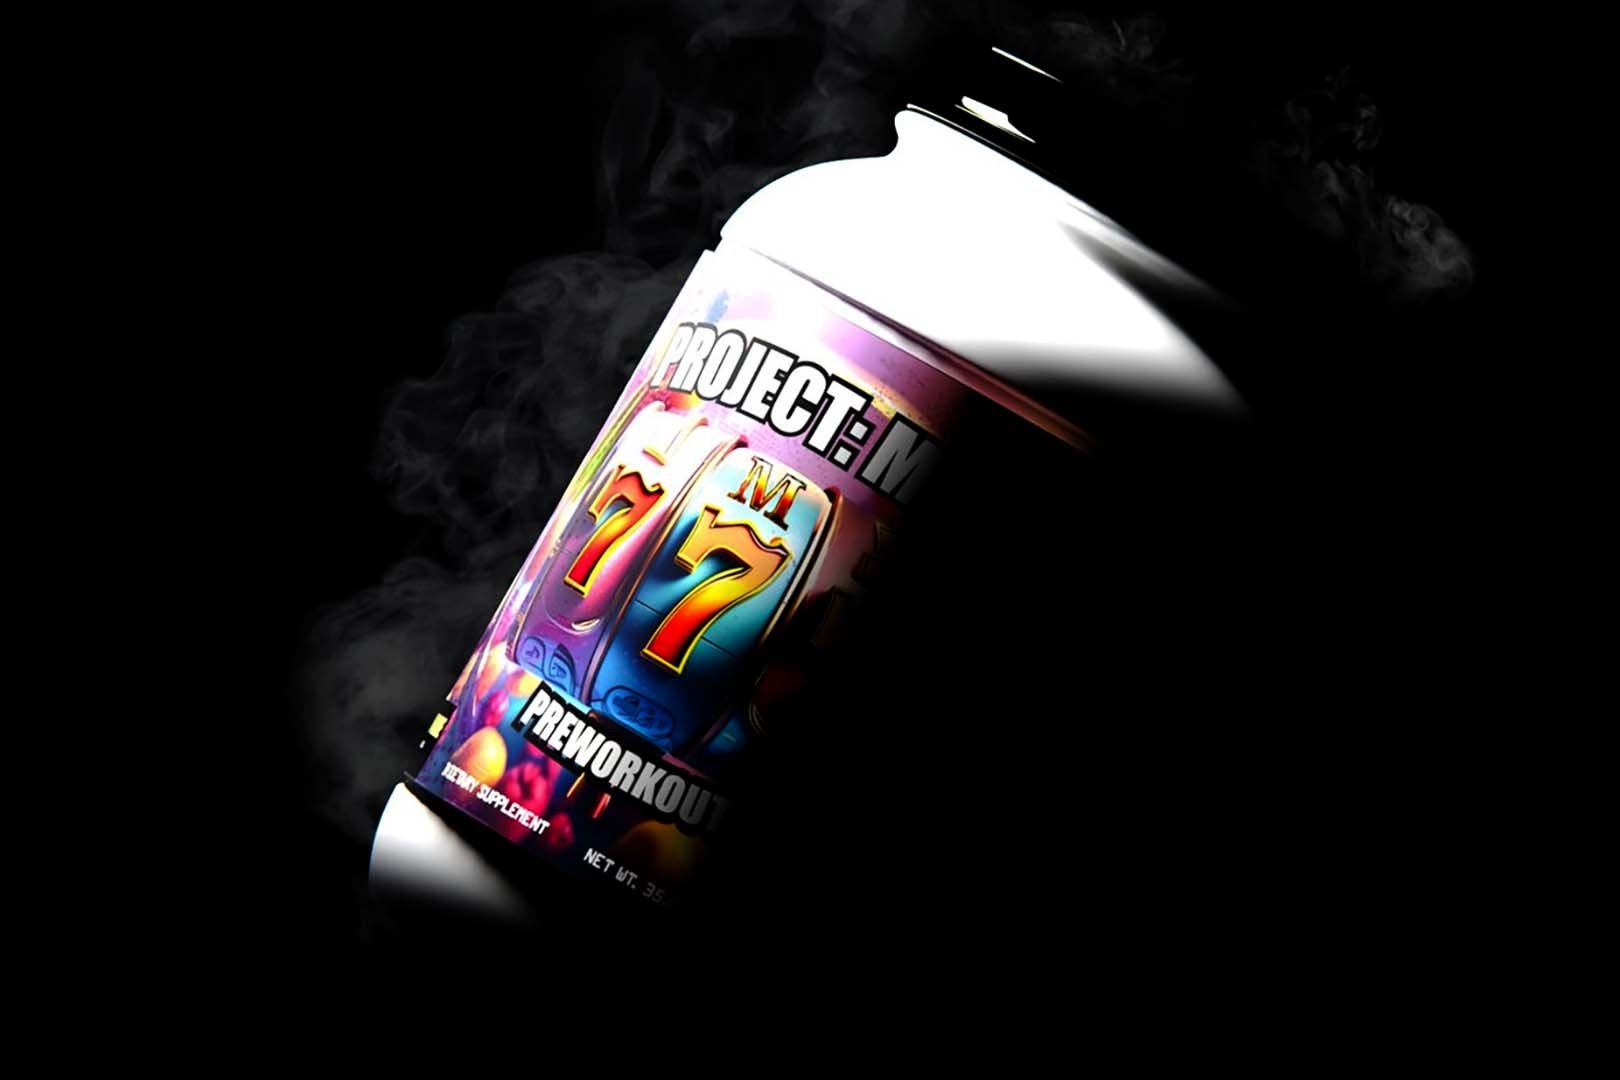 UXO squeezes an insane 43g of actives into its powerhouse M777 pre-workout